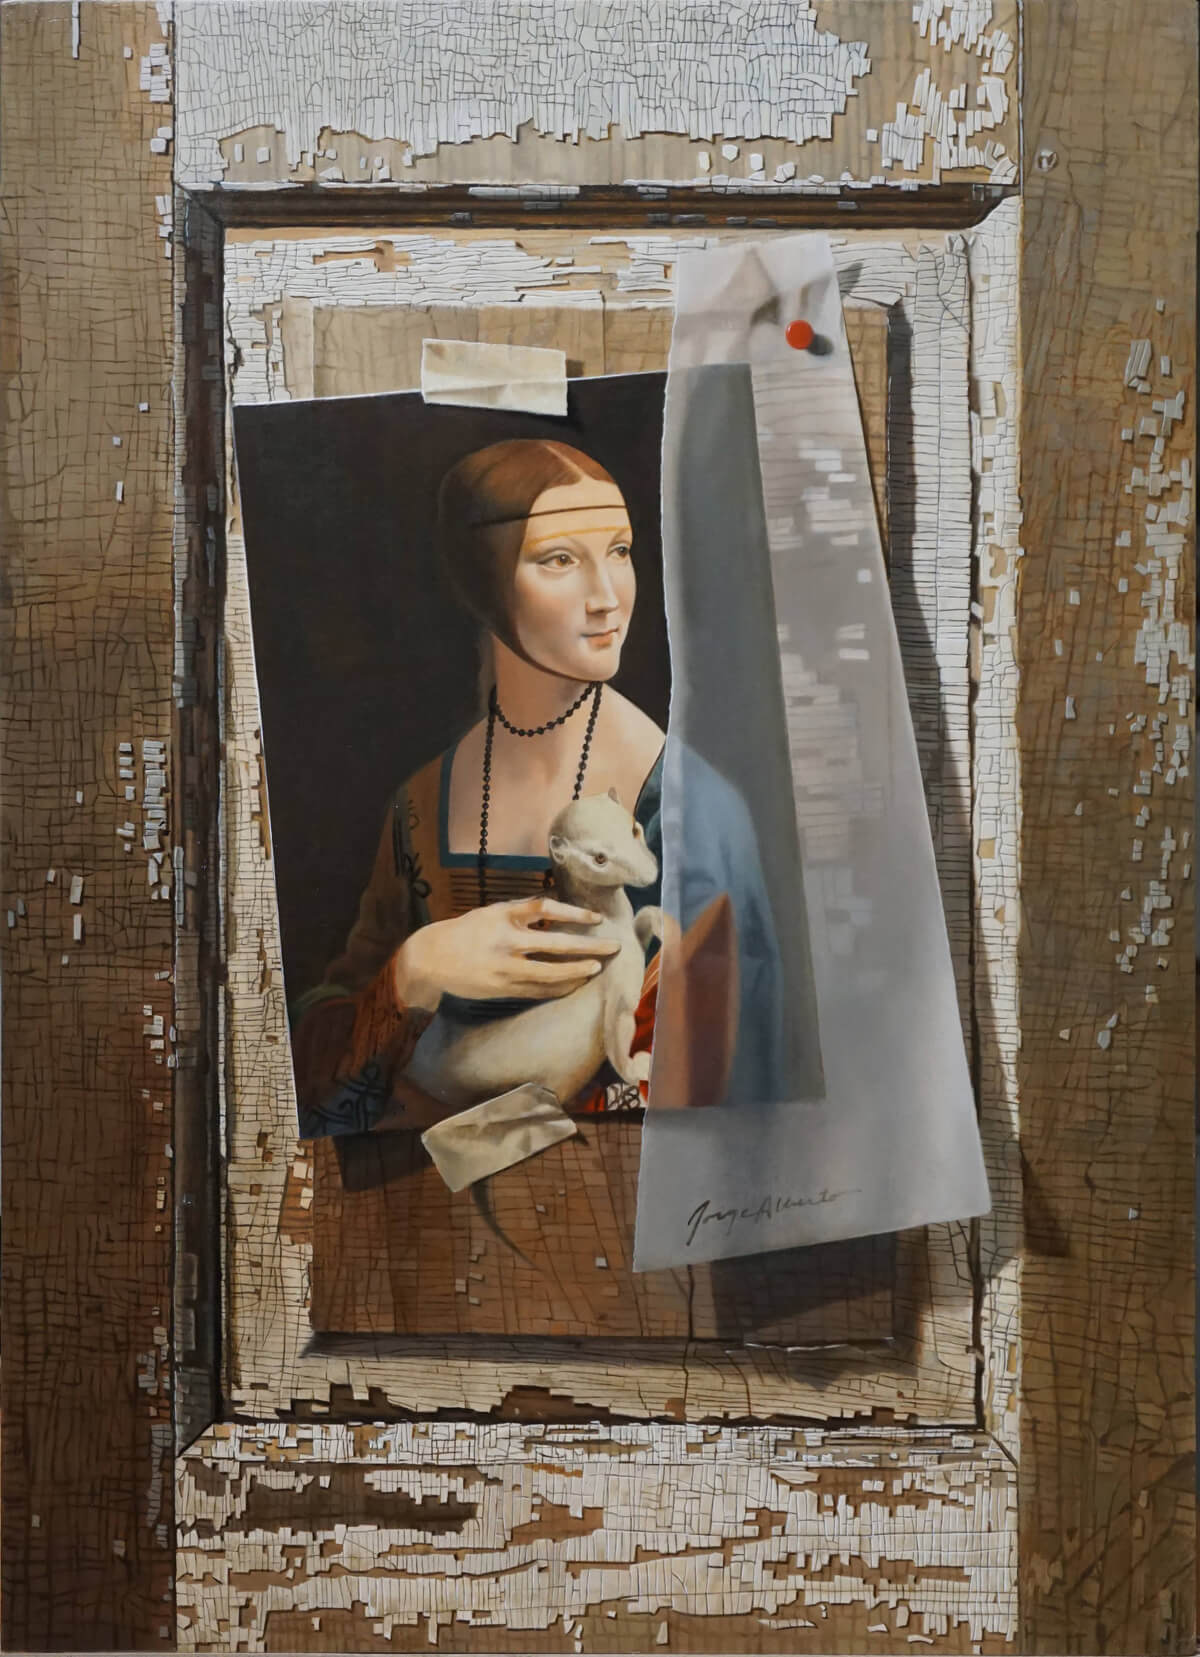 A trompe l'oeil style painting showing Lady with Ermine taped to a background of peeling paint a pice of ripped vellum paper is covering the right hand side of the picture.